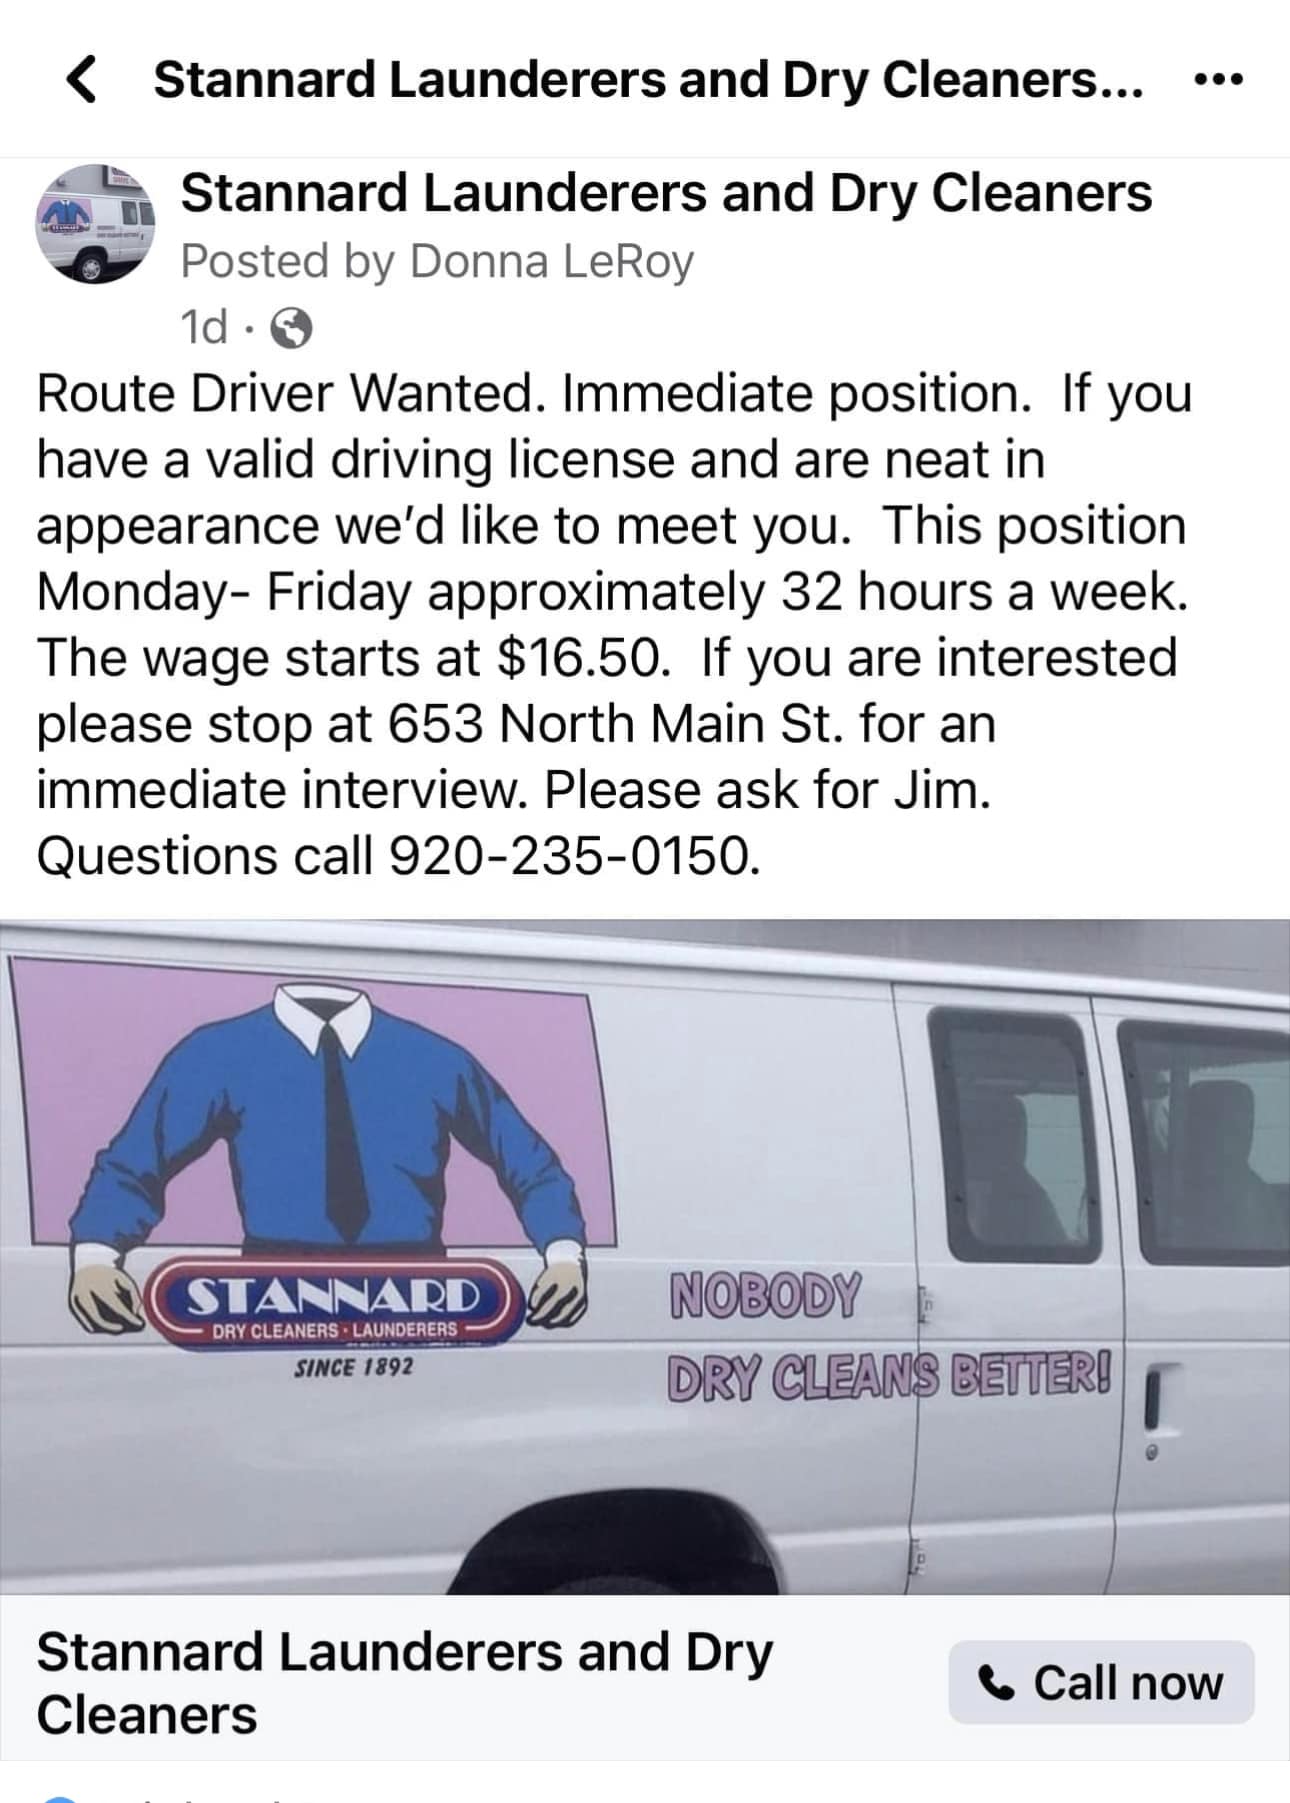 Stannard Drycleaners & Lndrrs